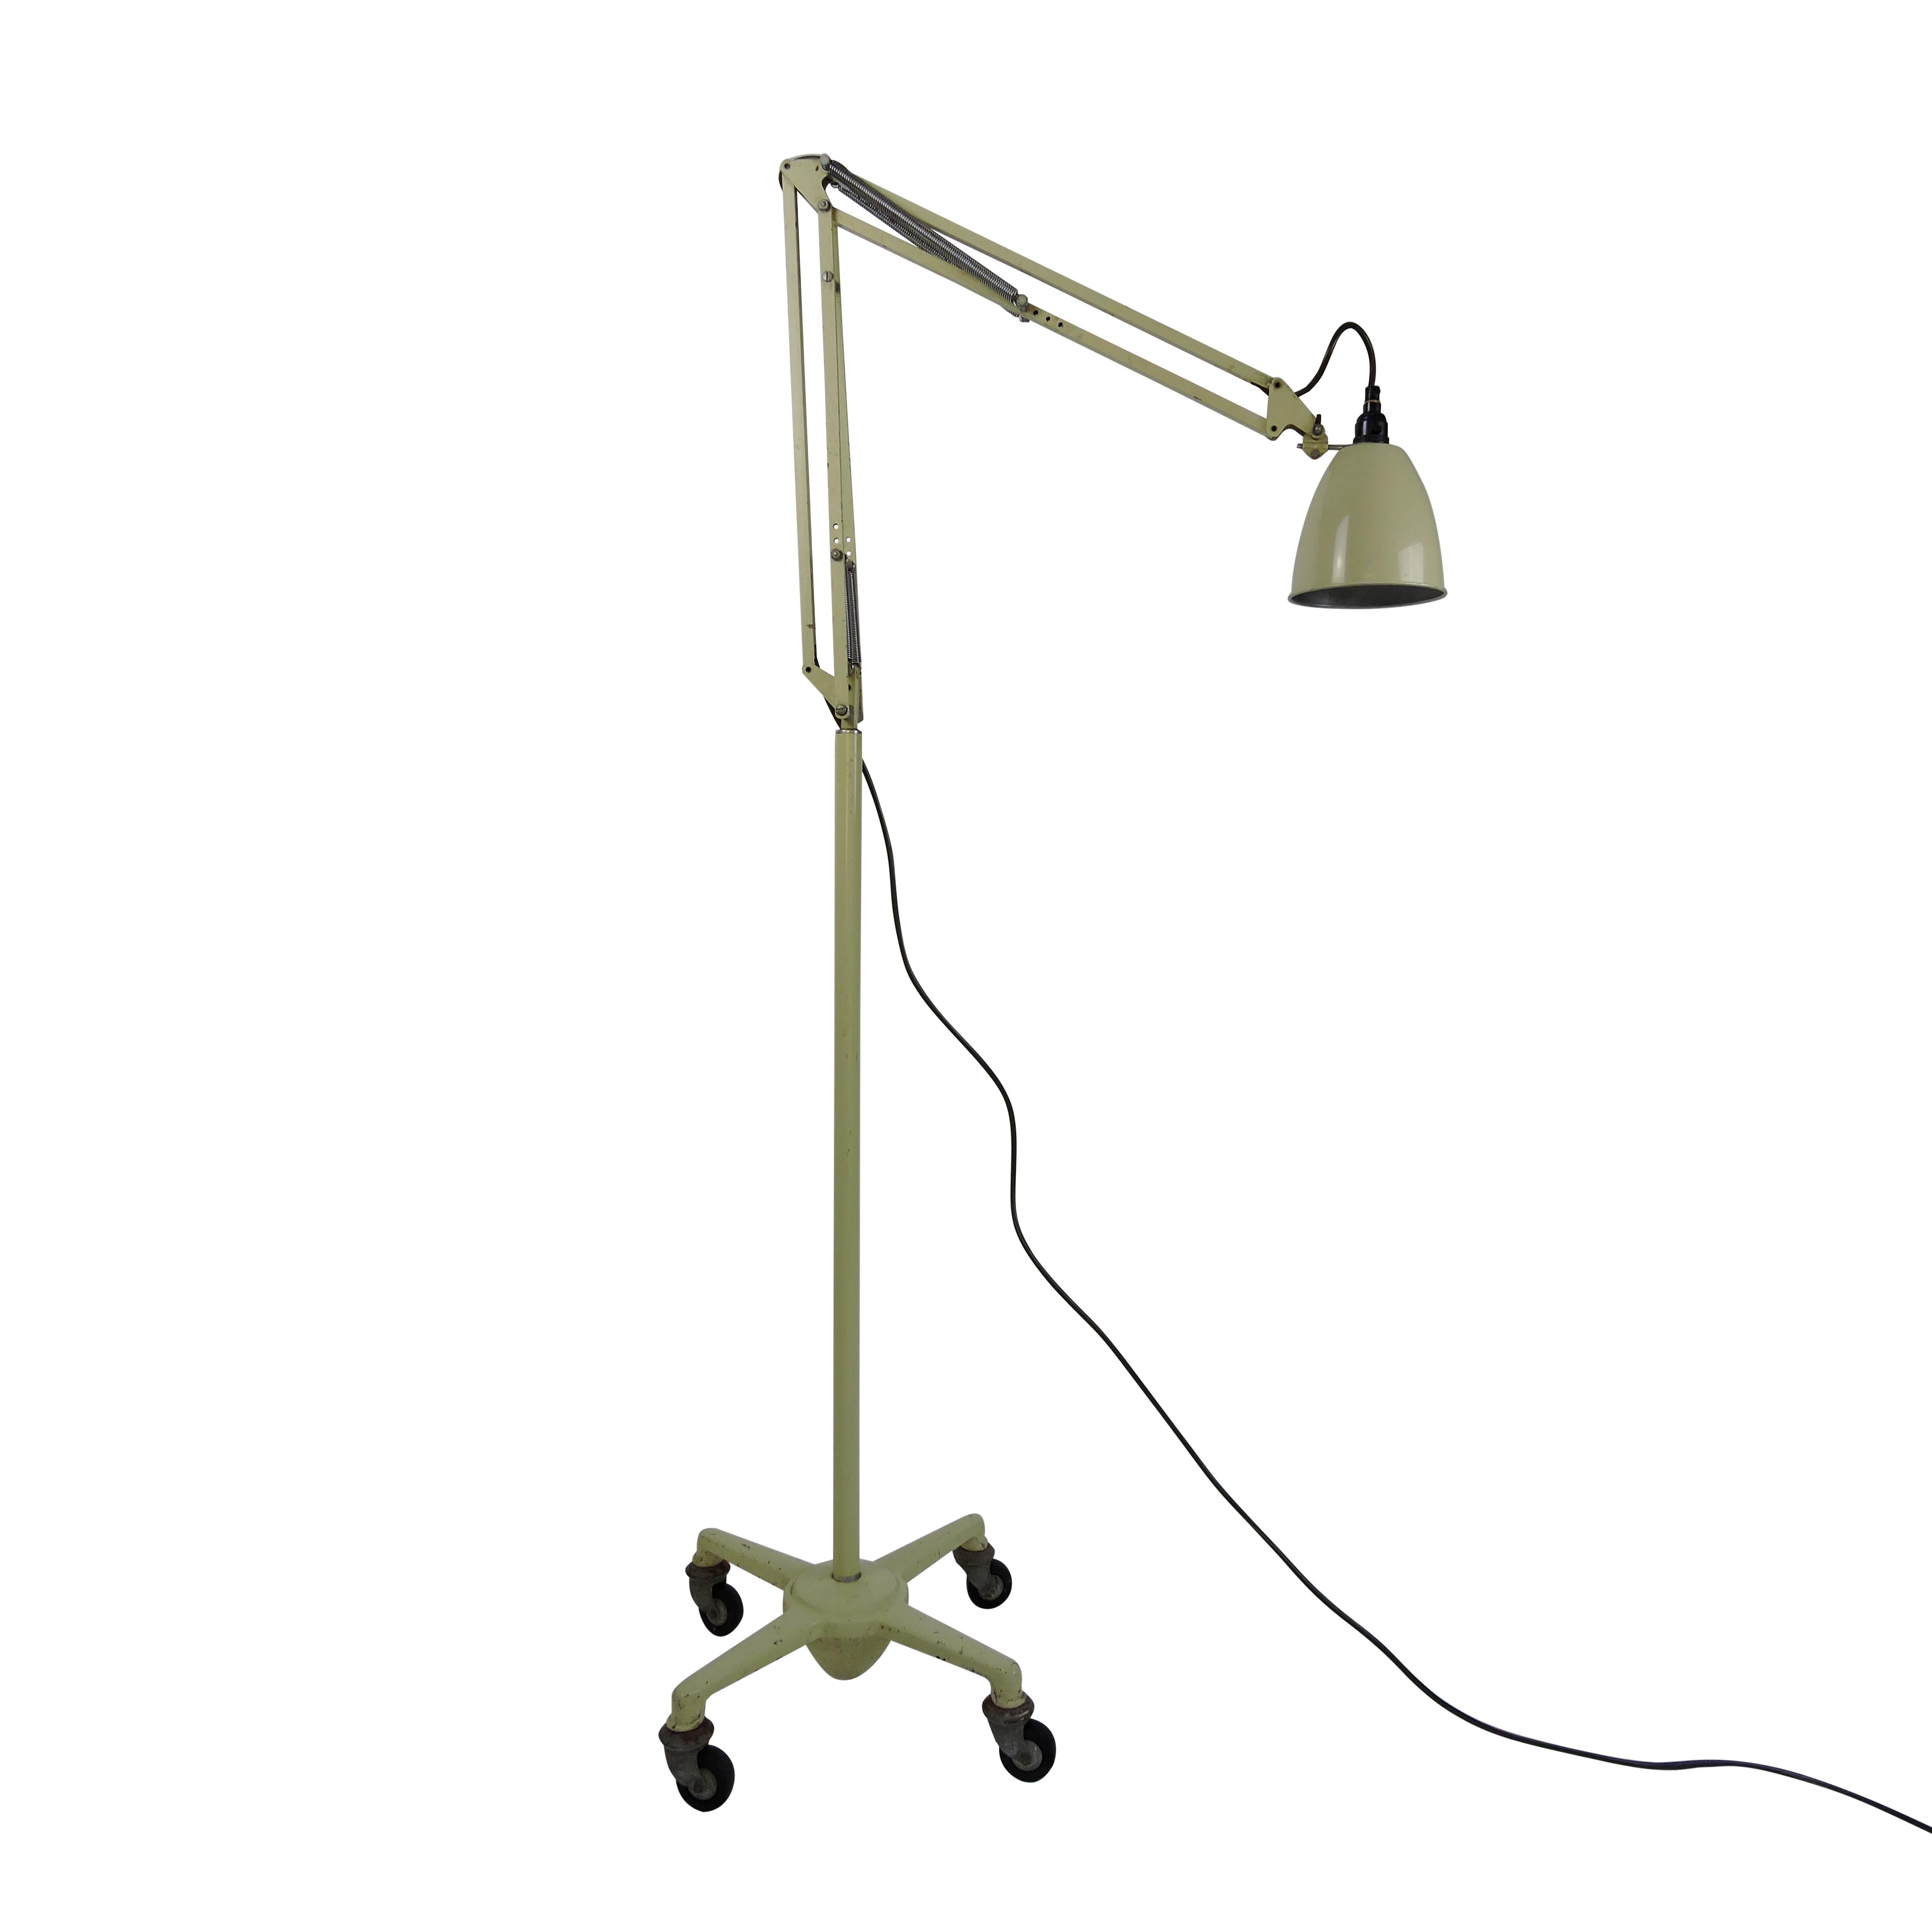 Anglepoise floor lamp on wheels, designed by George Cawardine. Manufactured by Herbert Terry & Sons, Redditch.